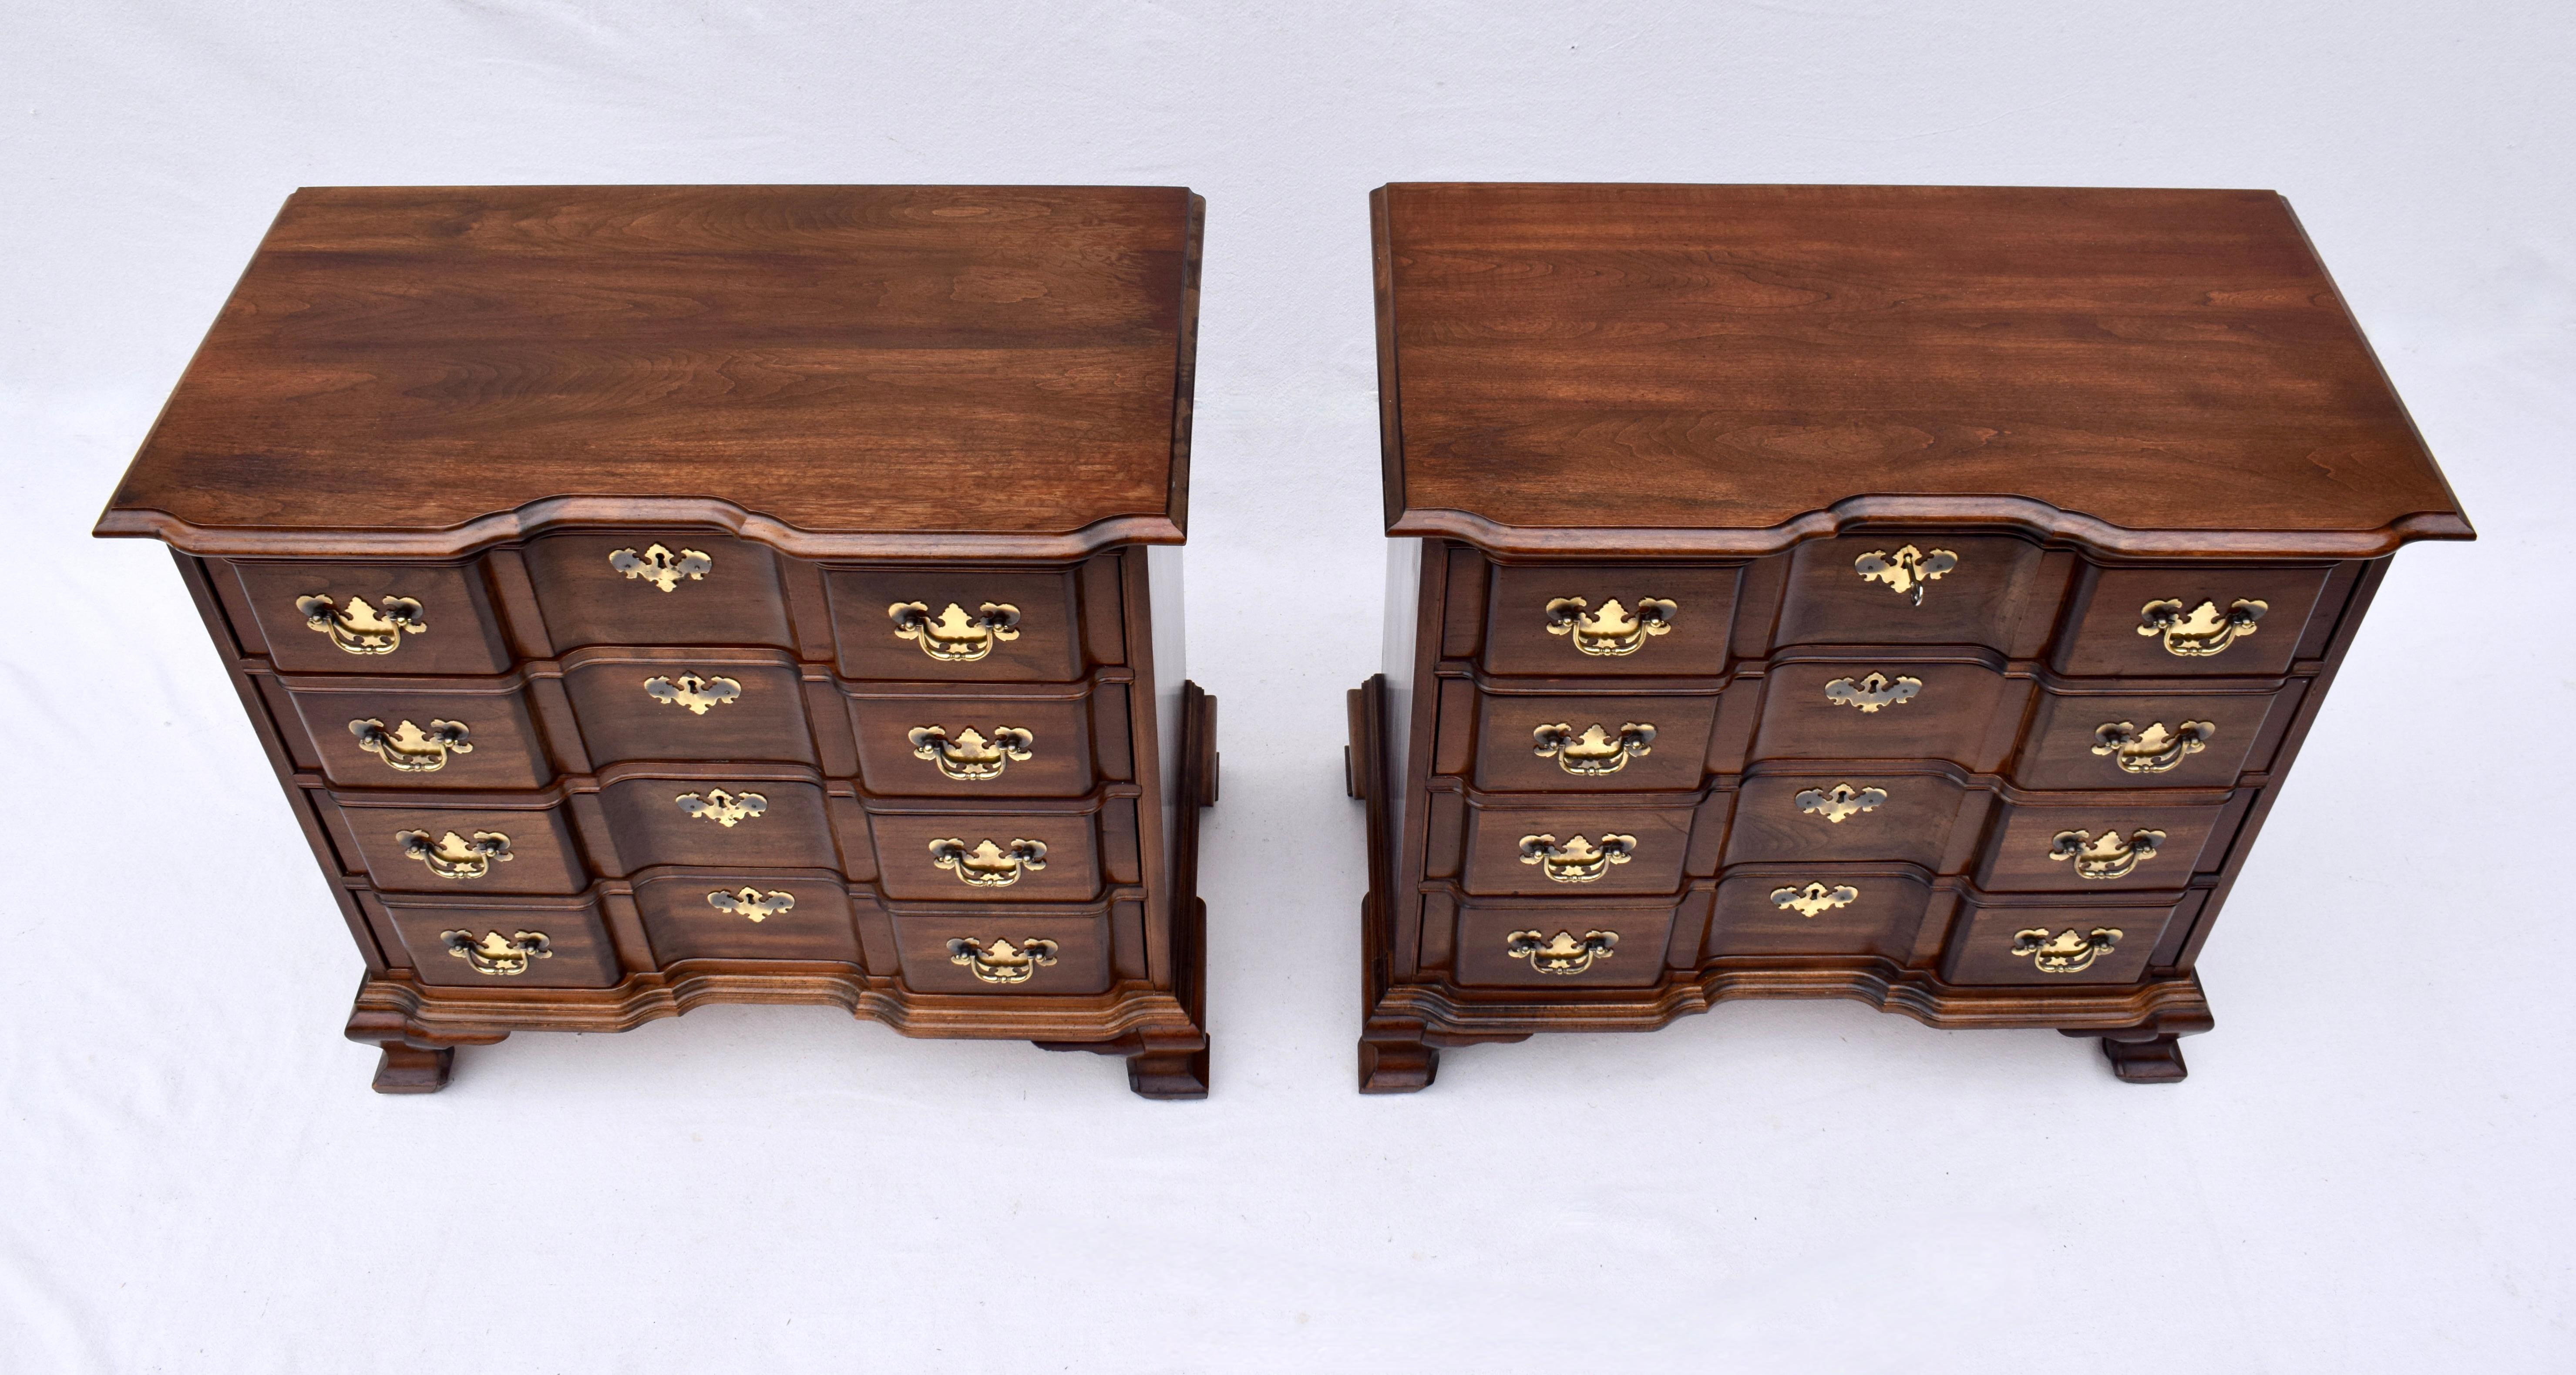 A pair of Georgian or Chippendale Goddard style Bachelor night stands in solid Walnut with original brass hardware including working locks on all drawers & key.  Generous storage of heirloom quality; timeless design.